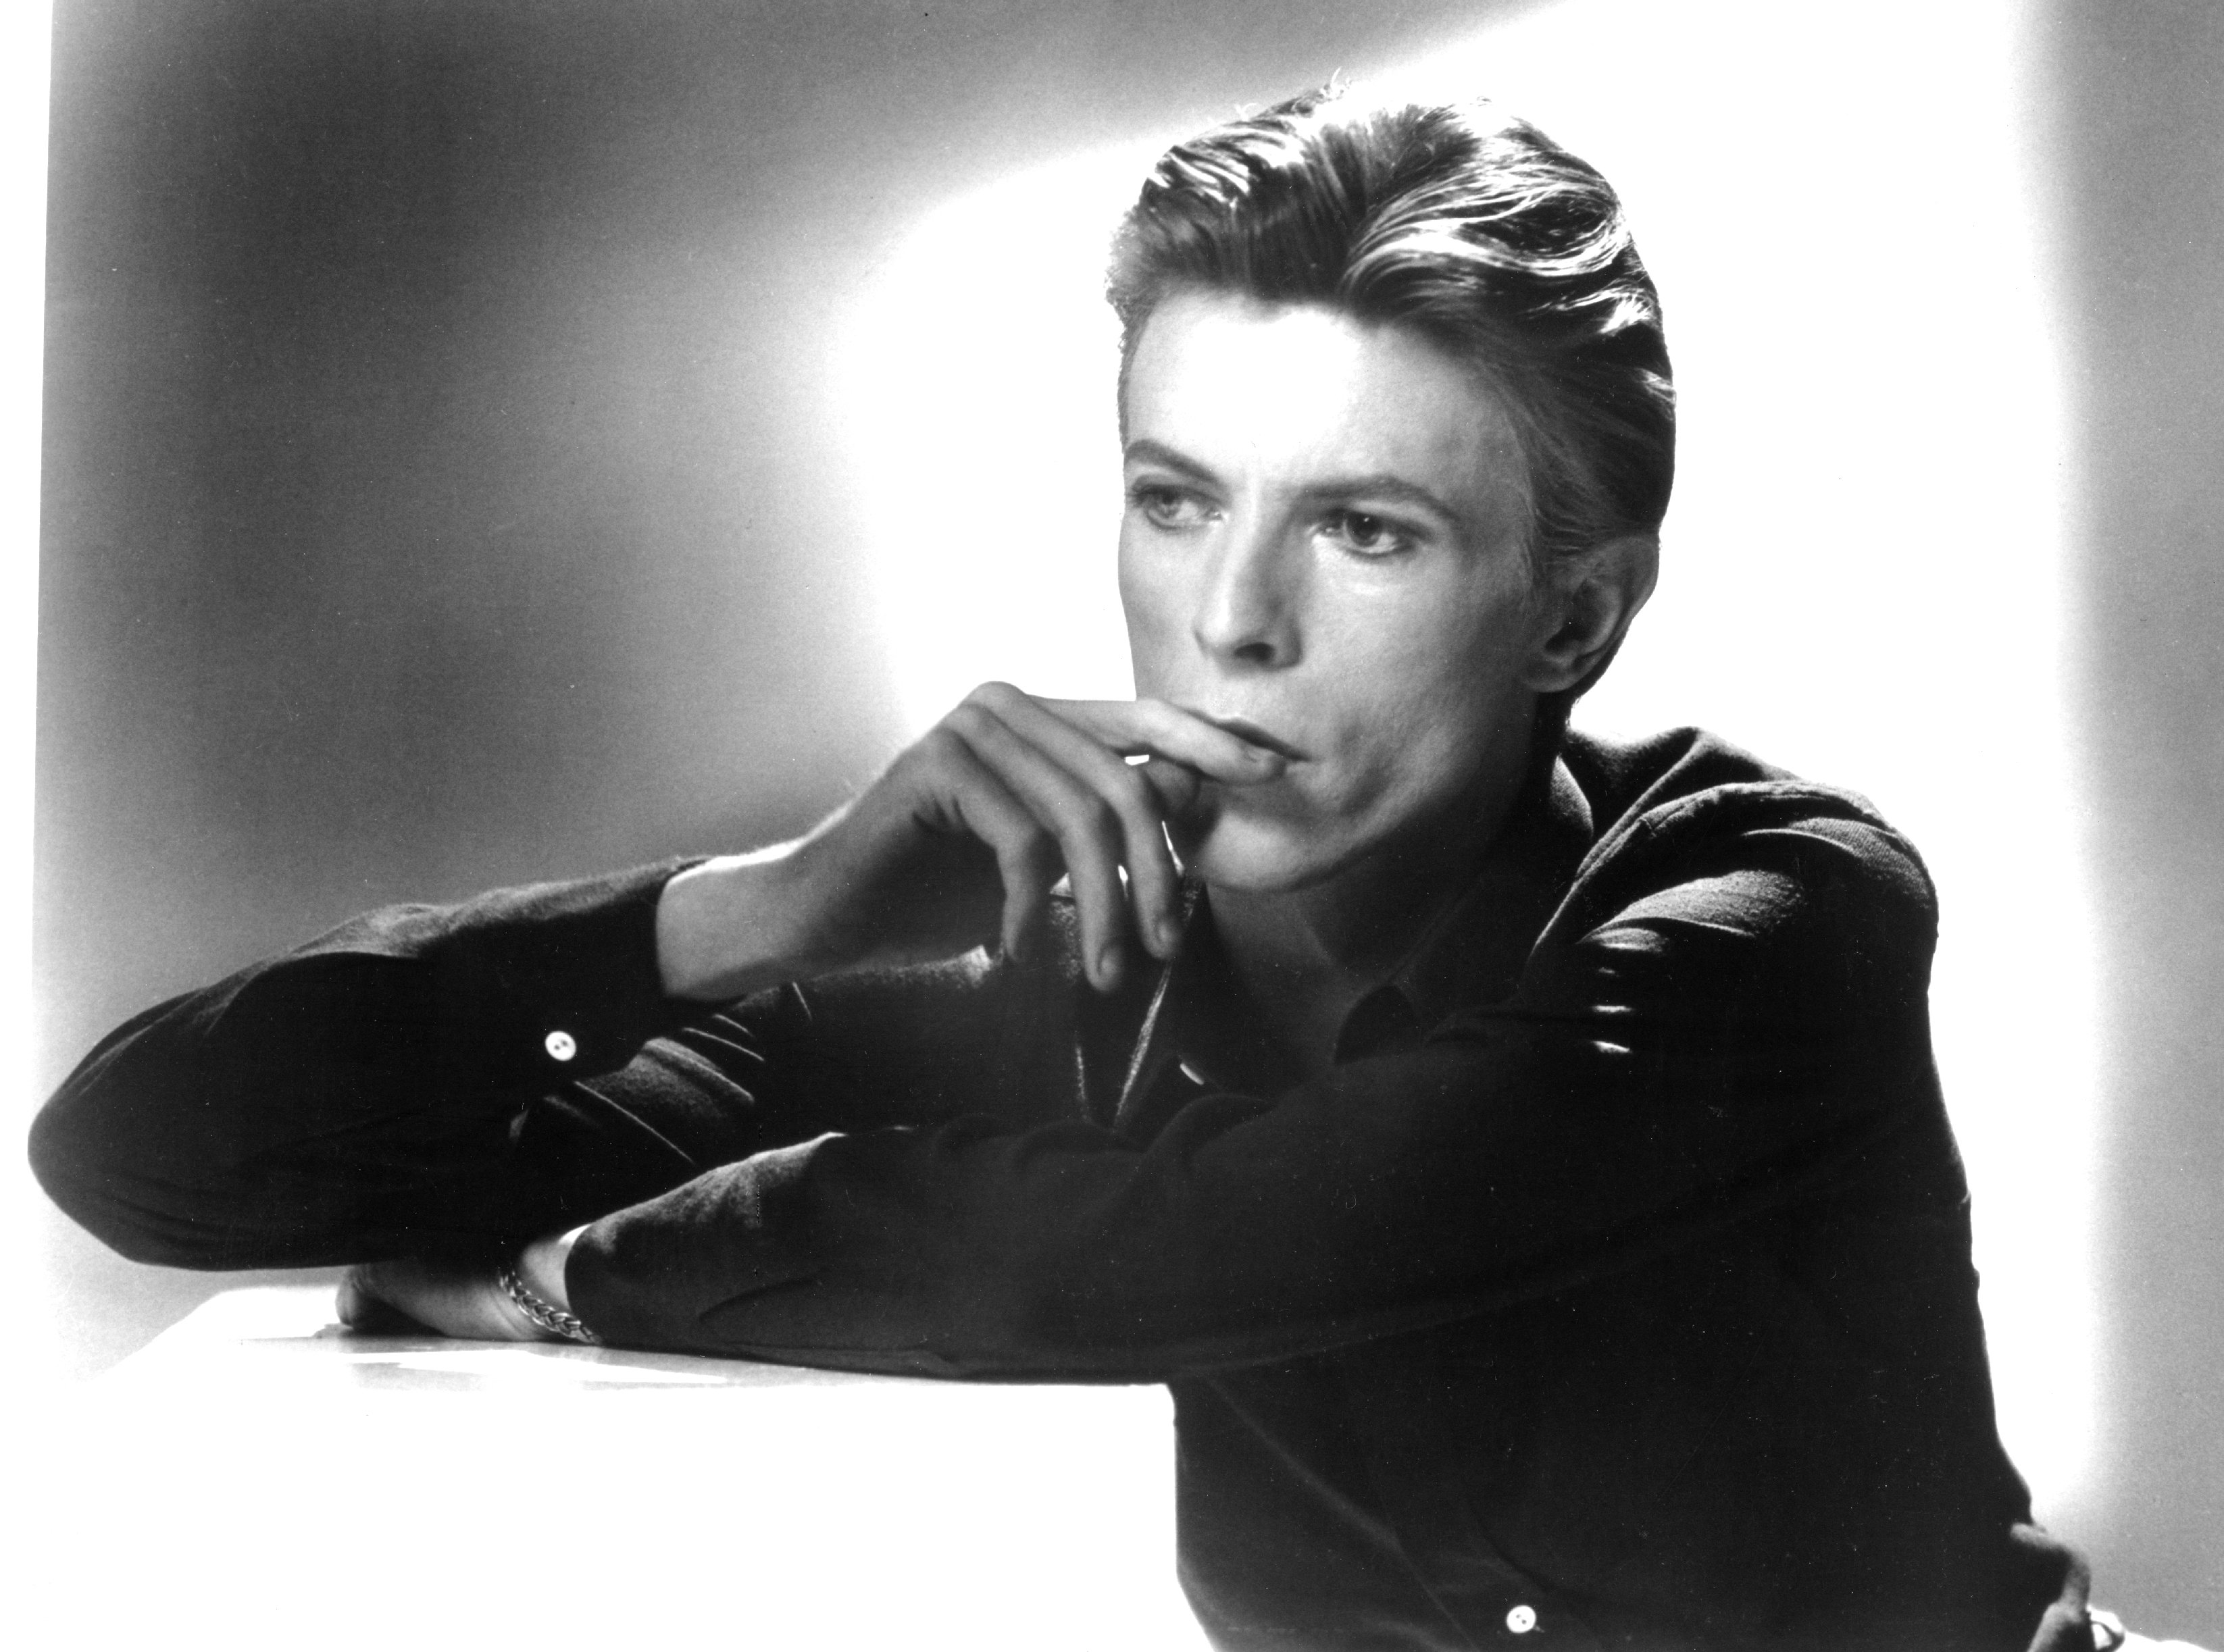 David Bowie with his finger on his lip